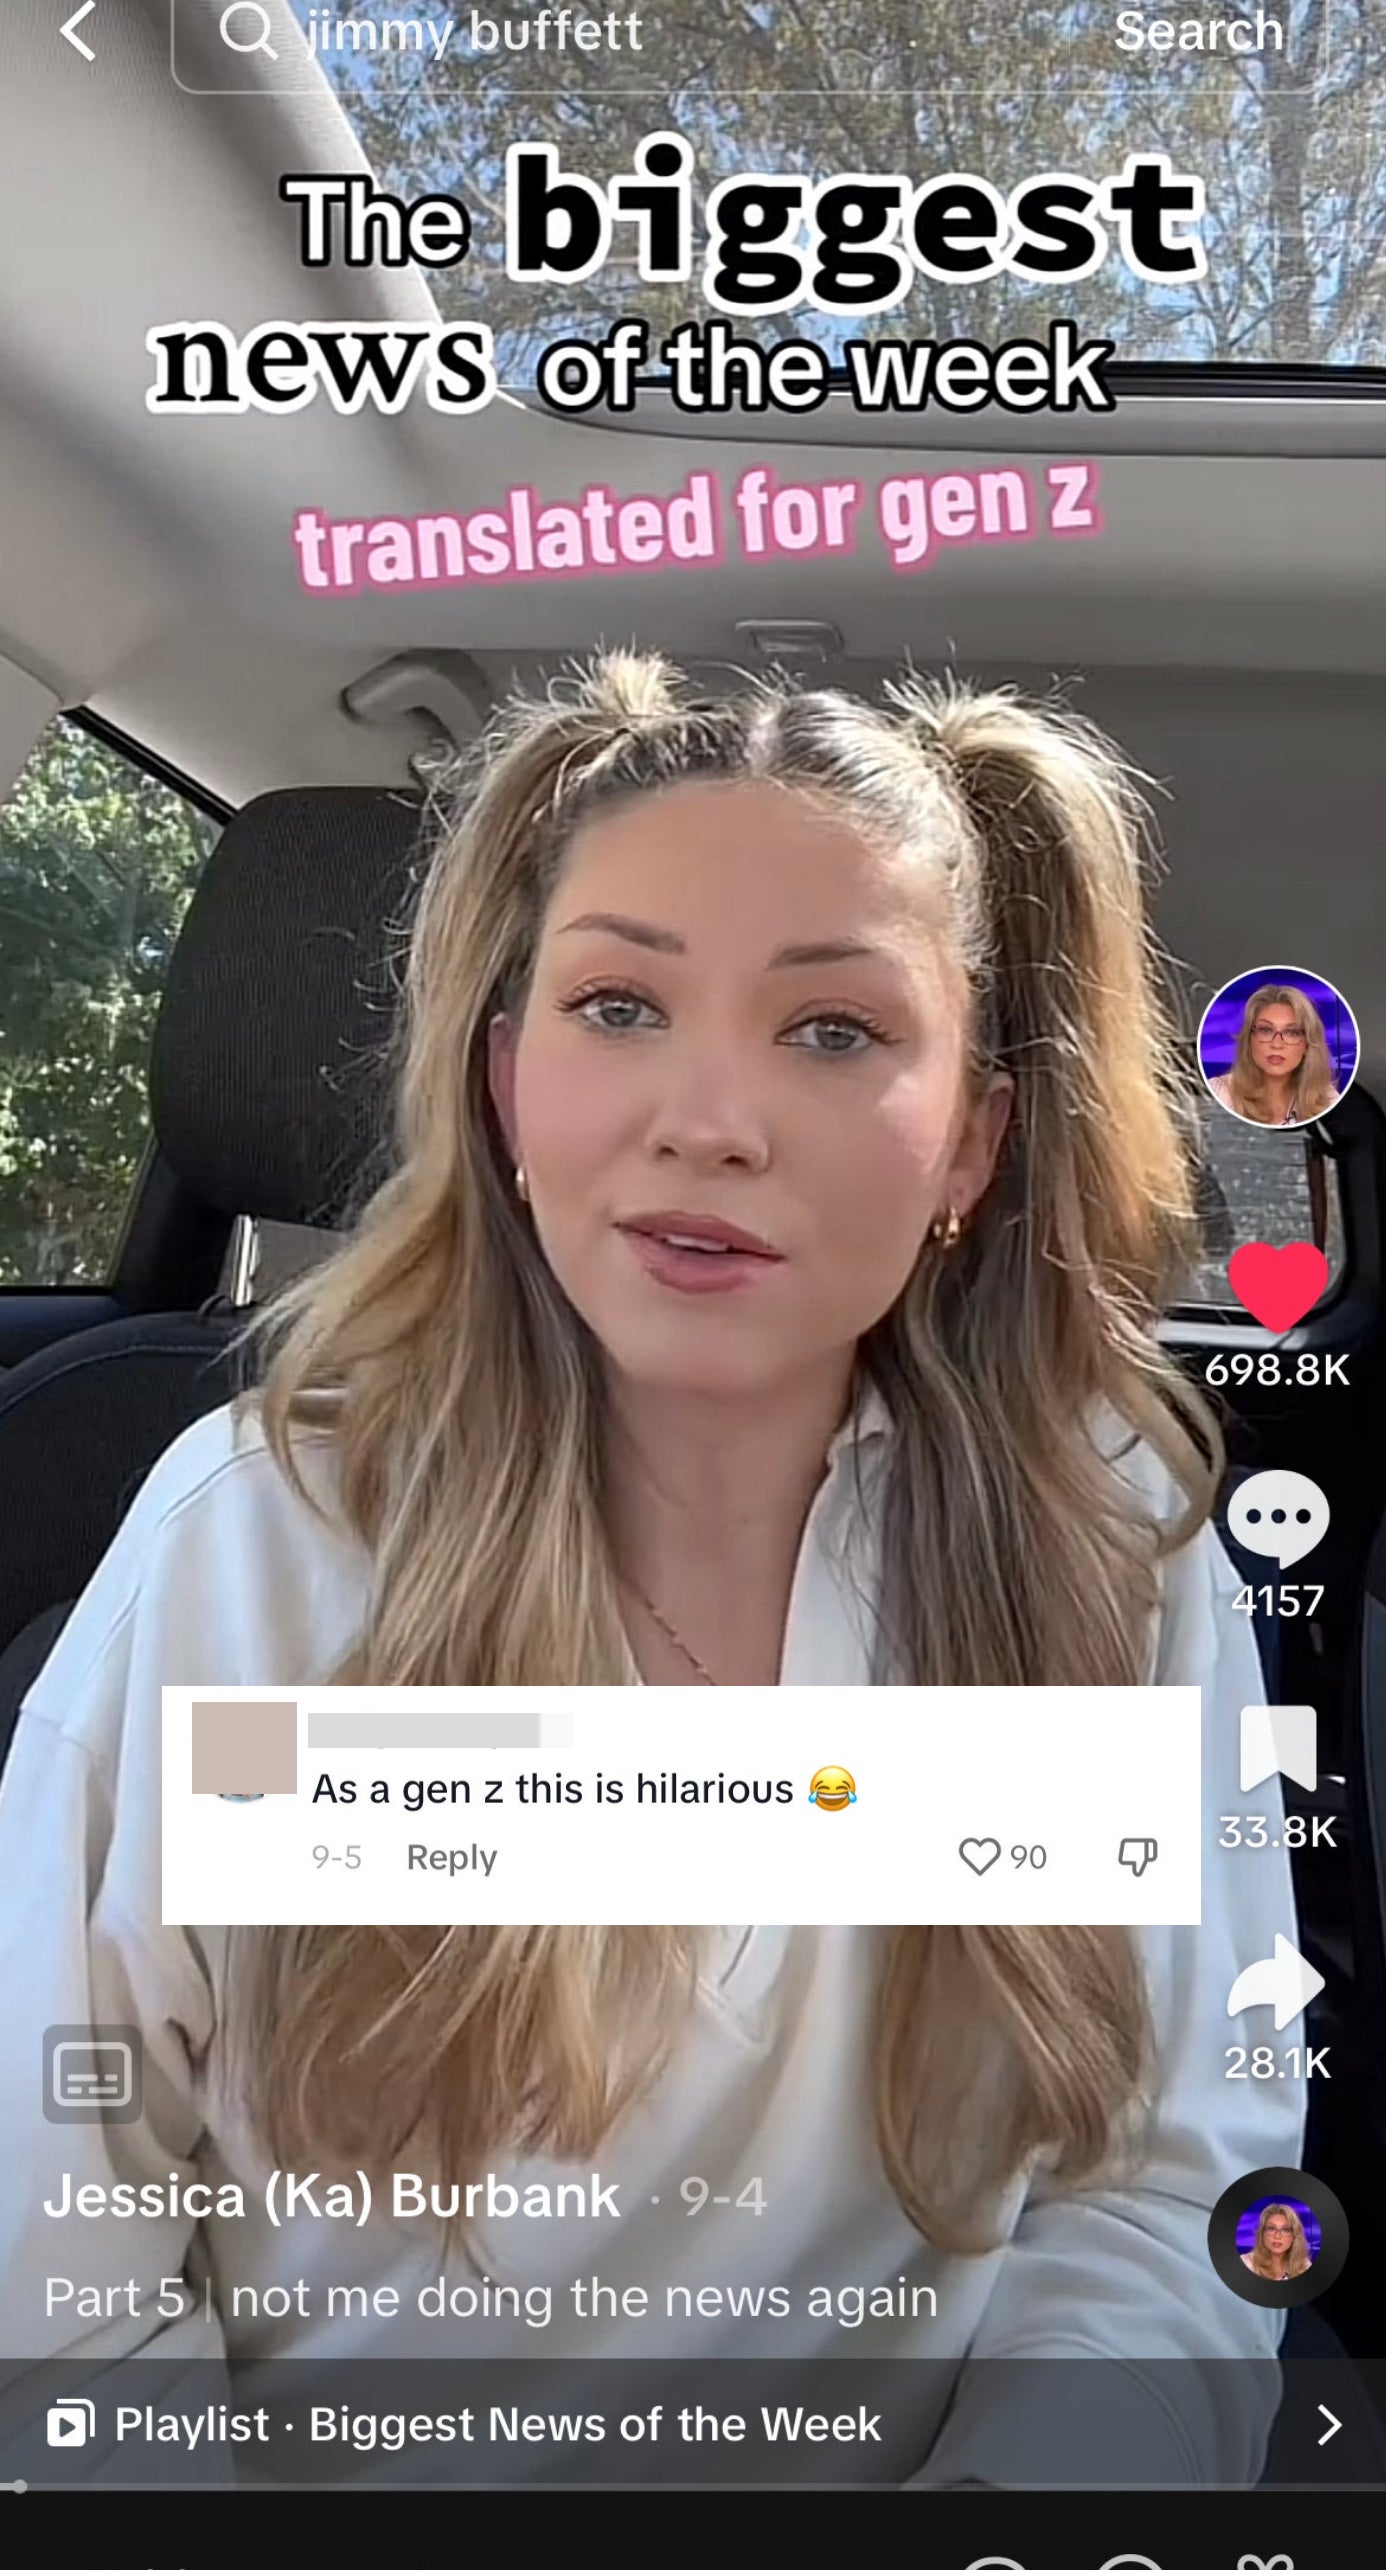 Jessica reading the news in her car with a comment that says as a gen z this is hilarious